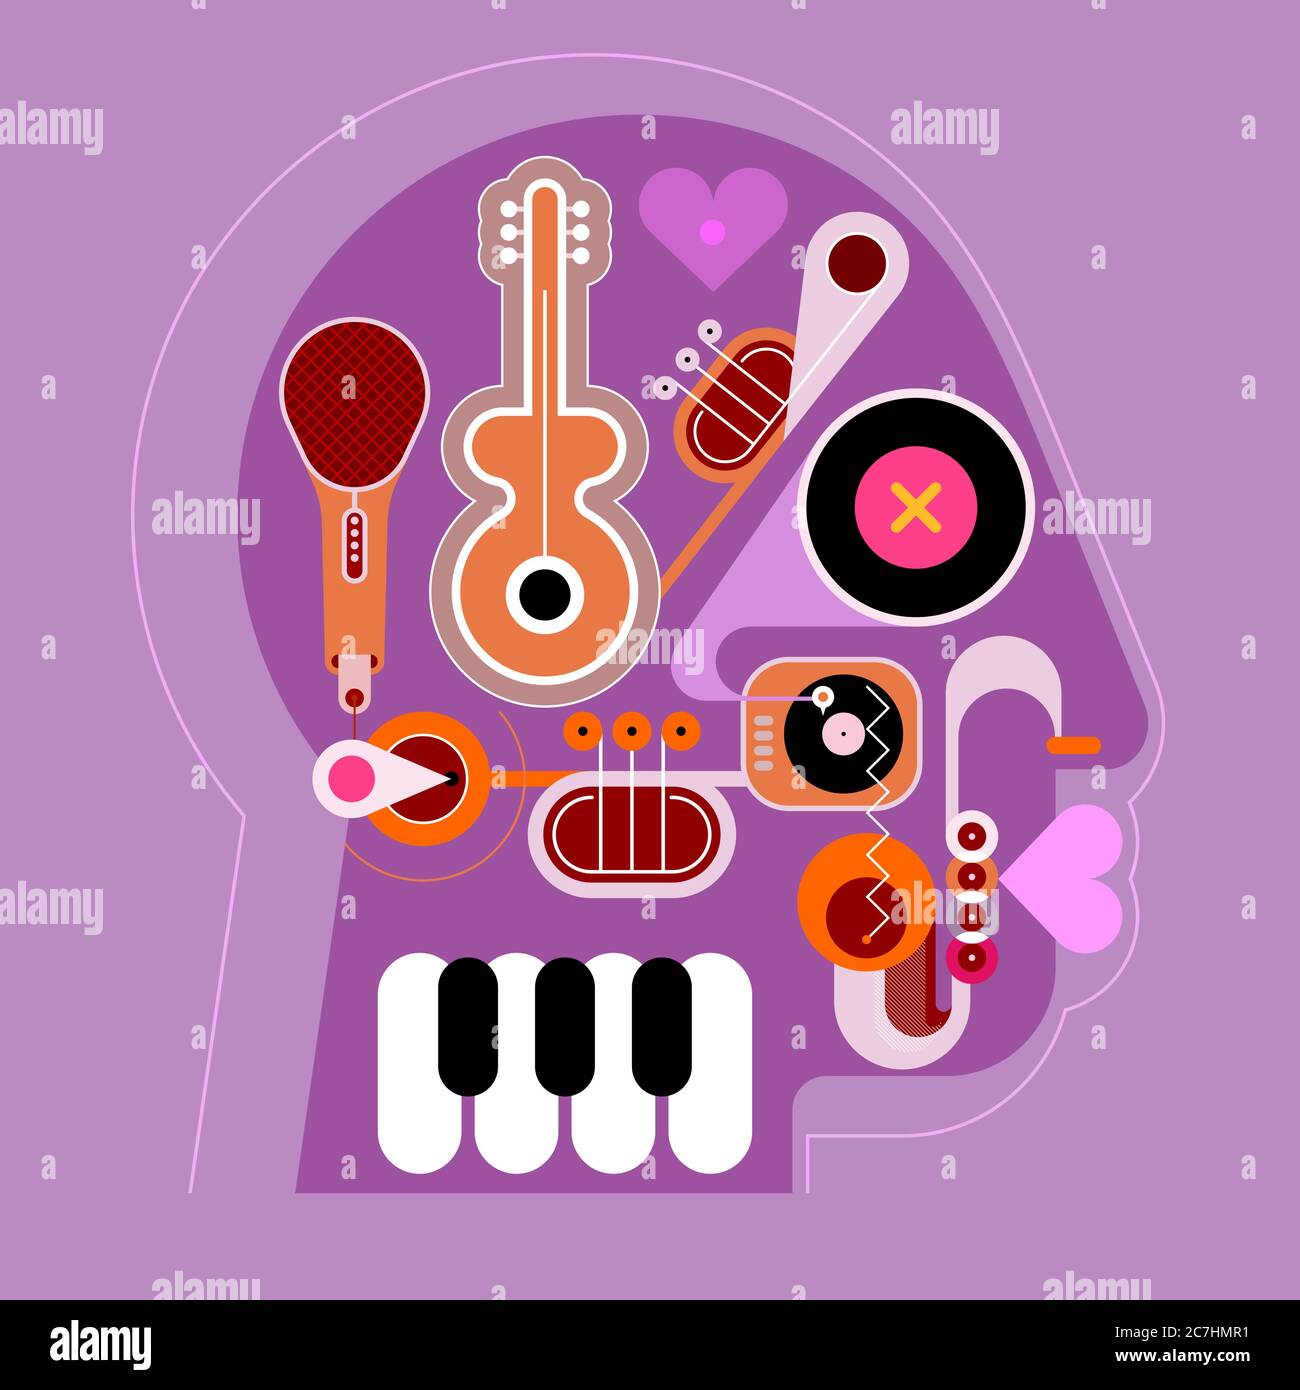 Human head shape design consisting with a different musical instruments vector illustration. Lilac and violet shades design. A music playing inside a Stock Vector